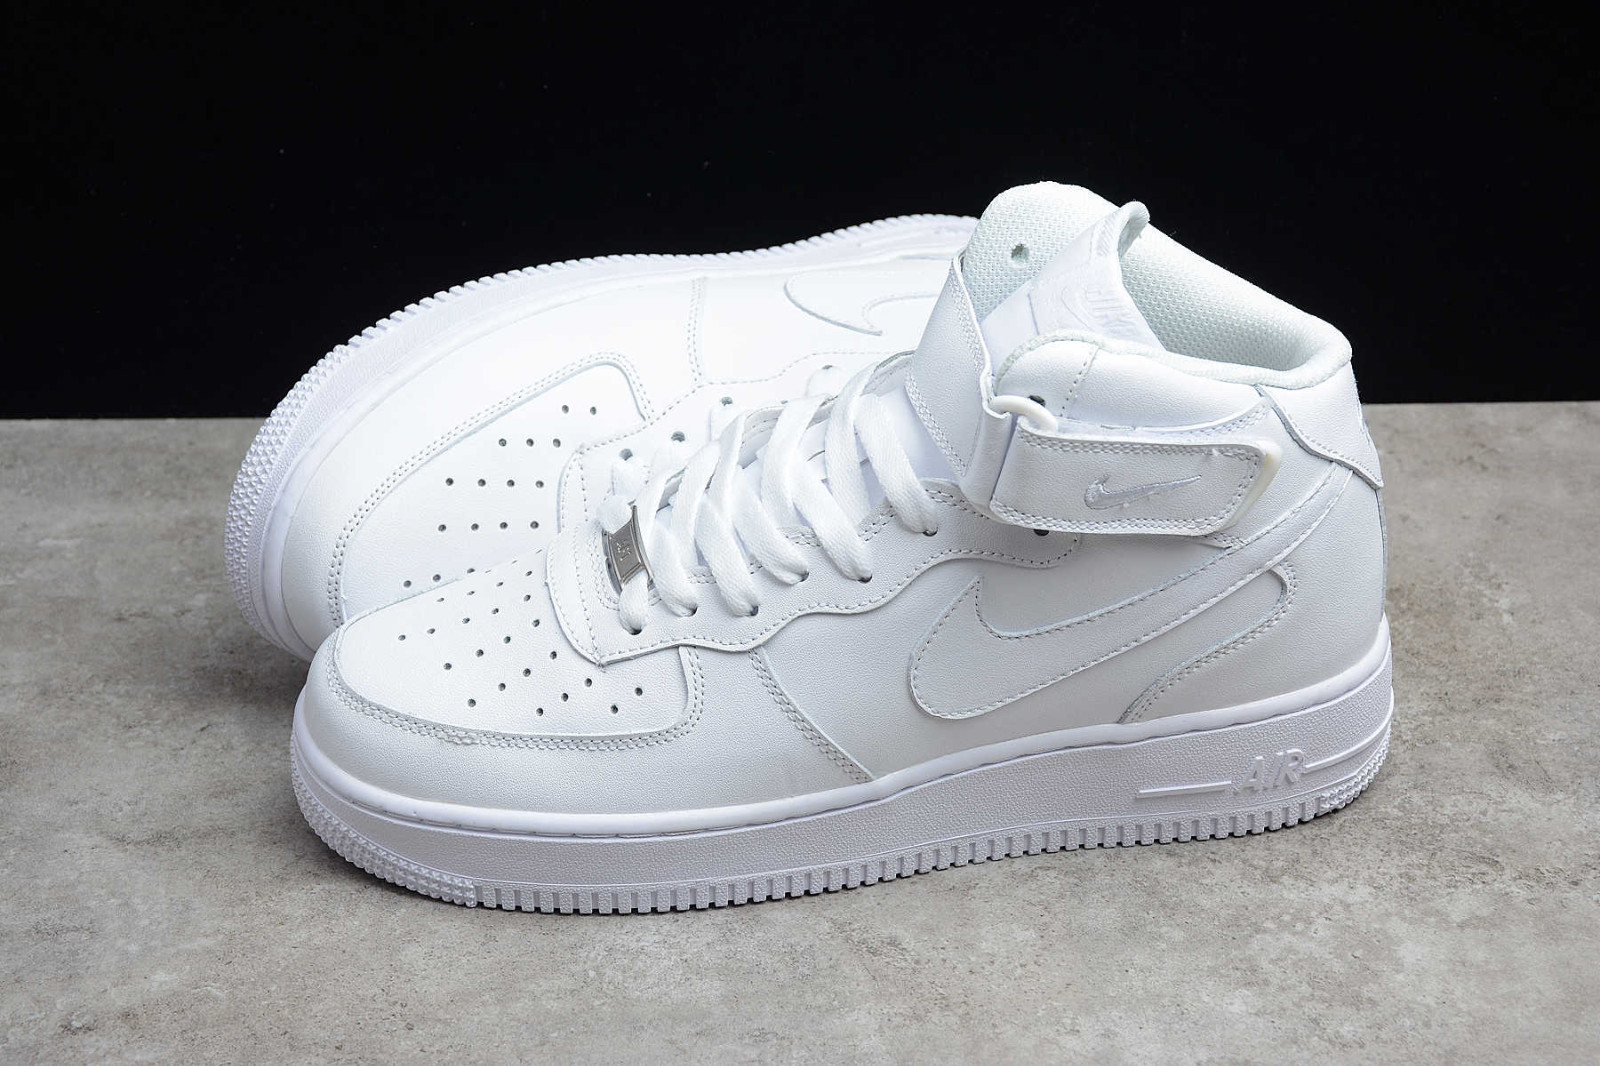 Nike Air Force 1 Mid 07 White Basketball Shoes 3154123 - 111